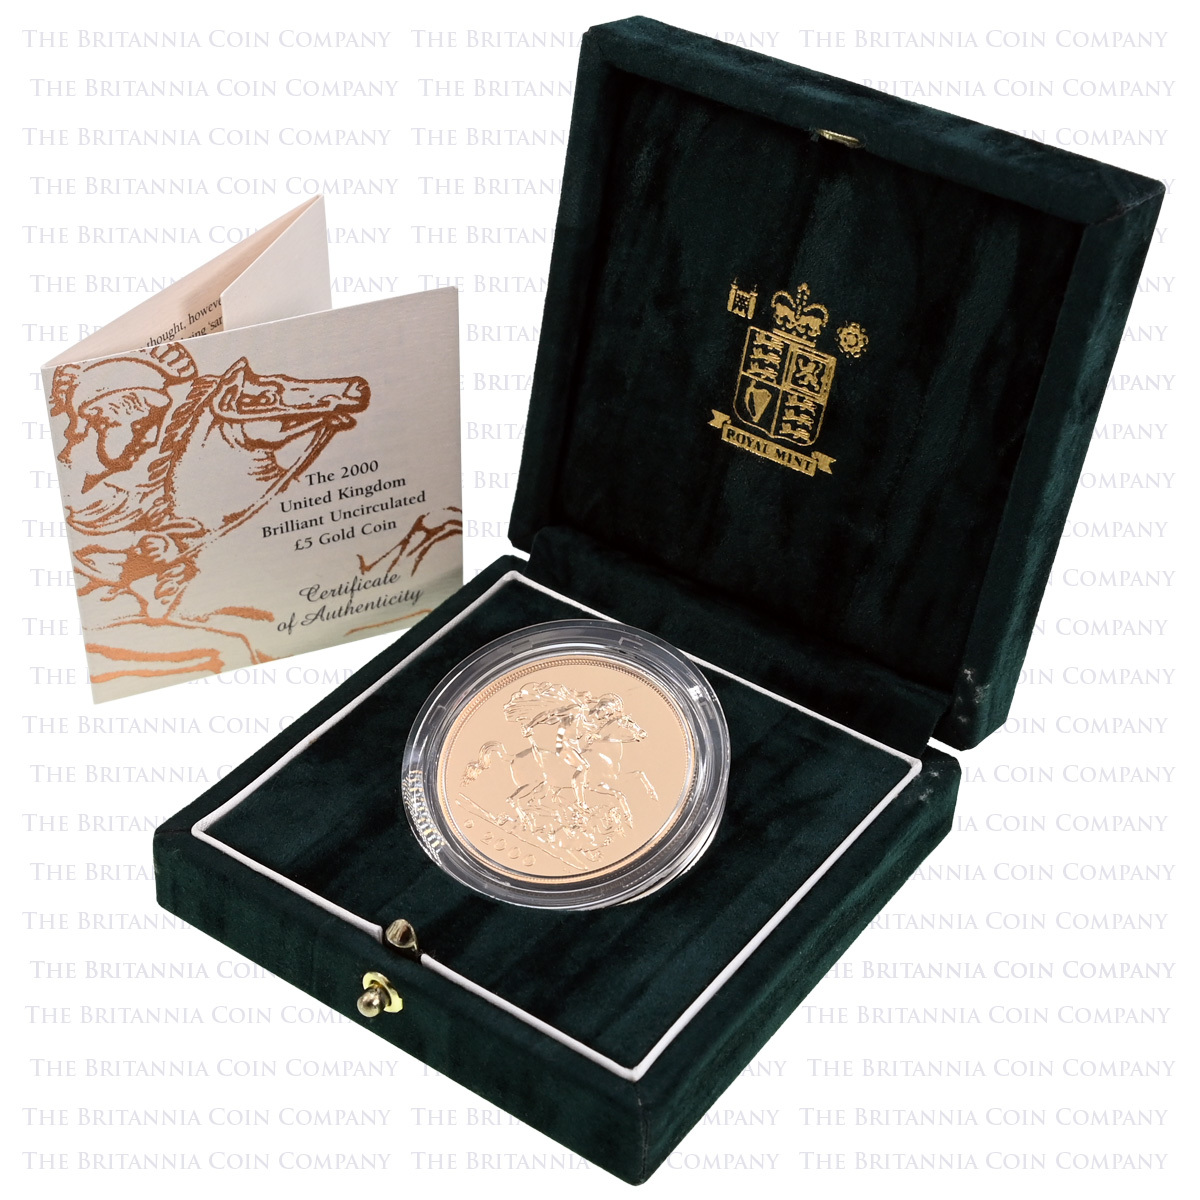 2000 Queen Elizabeth II Gold Brilliant Uncirculated Five Pound Quintuple Sovereign Coin Boxed